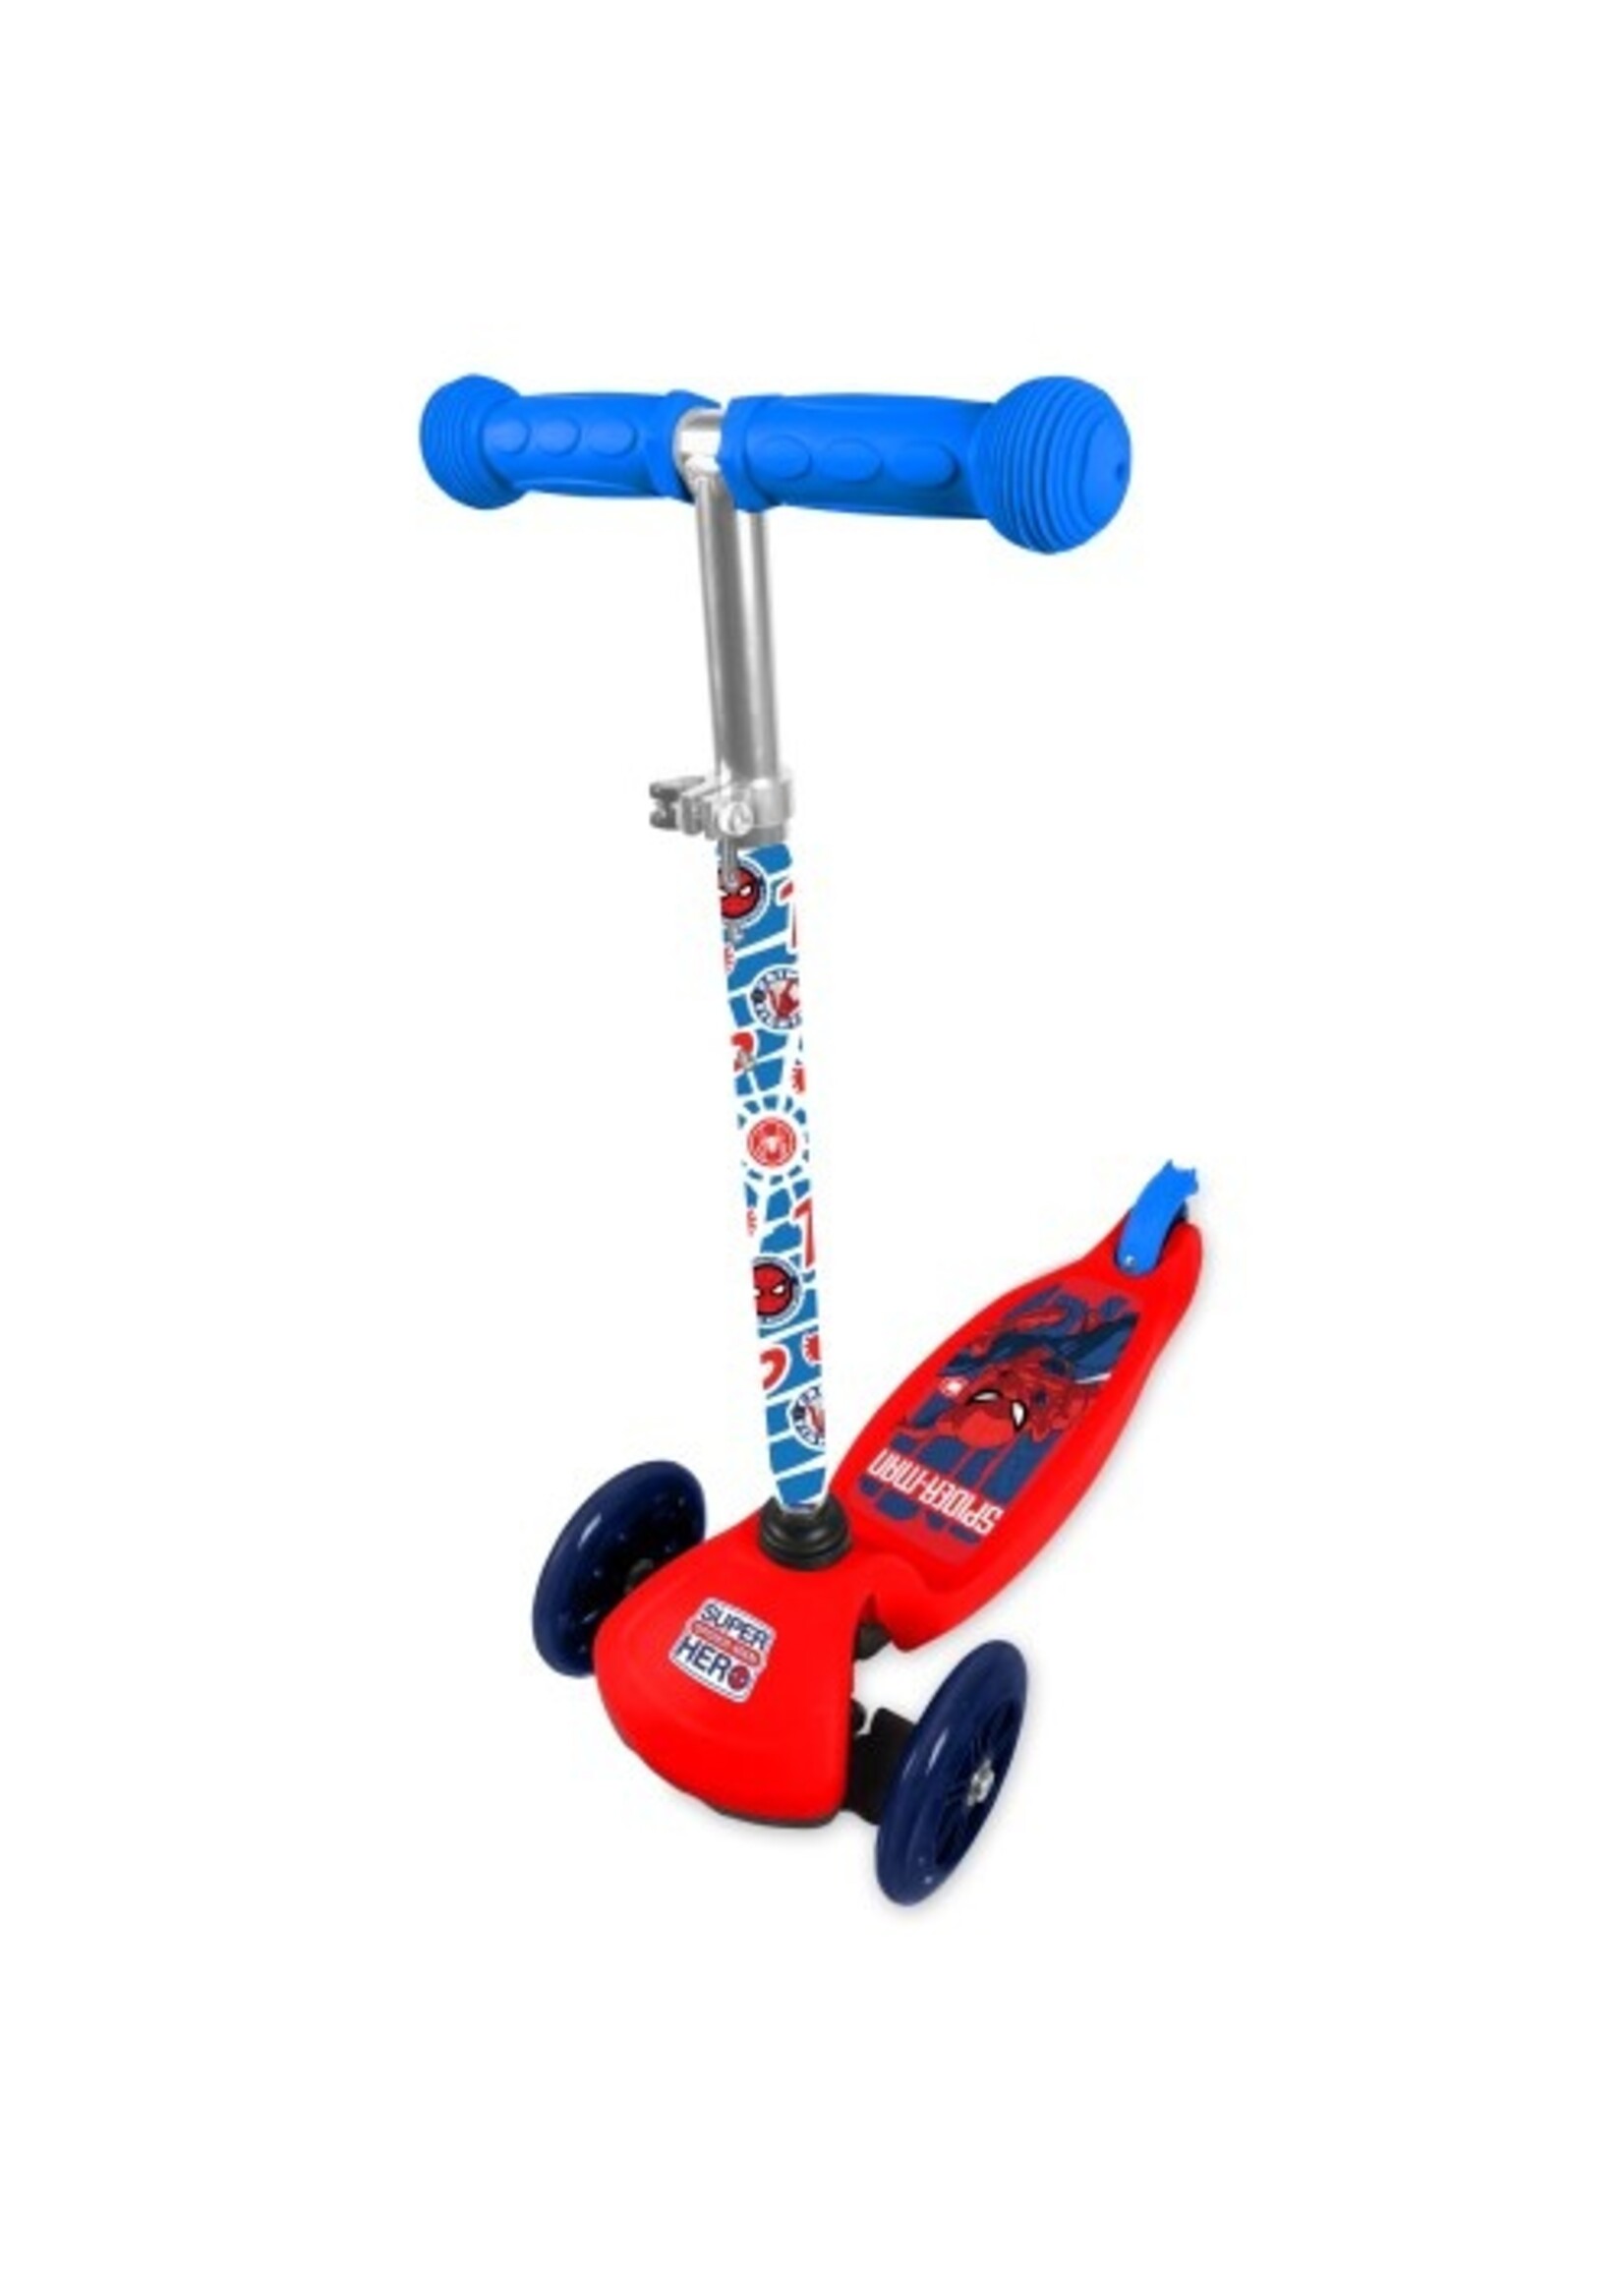 Marvel Spiderman 3 wheel scooter from Marvel red